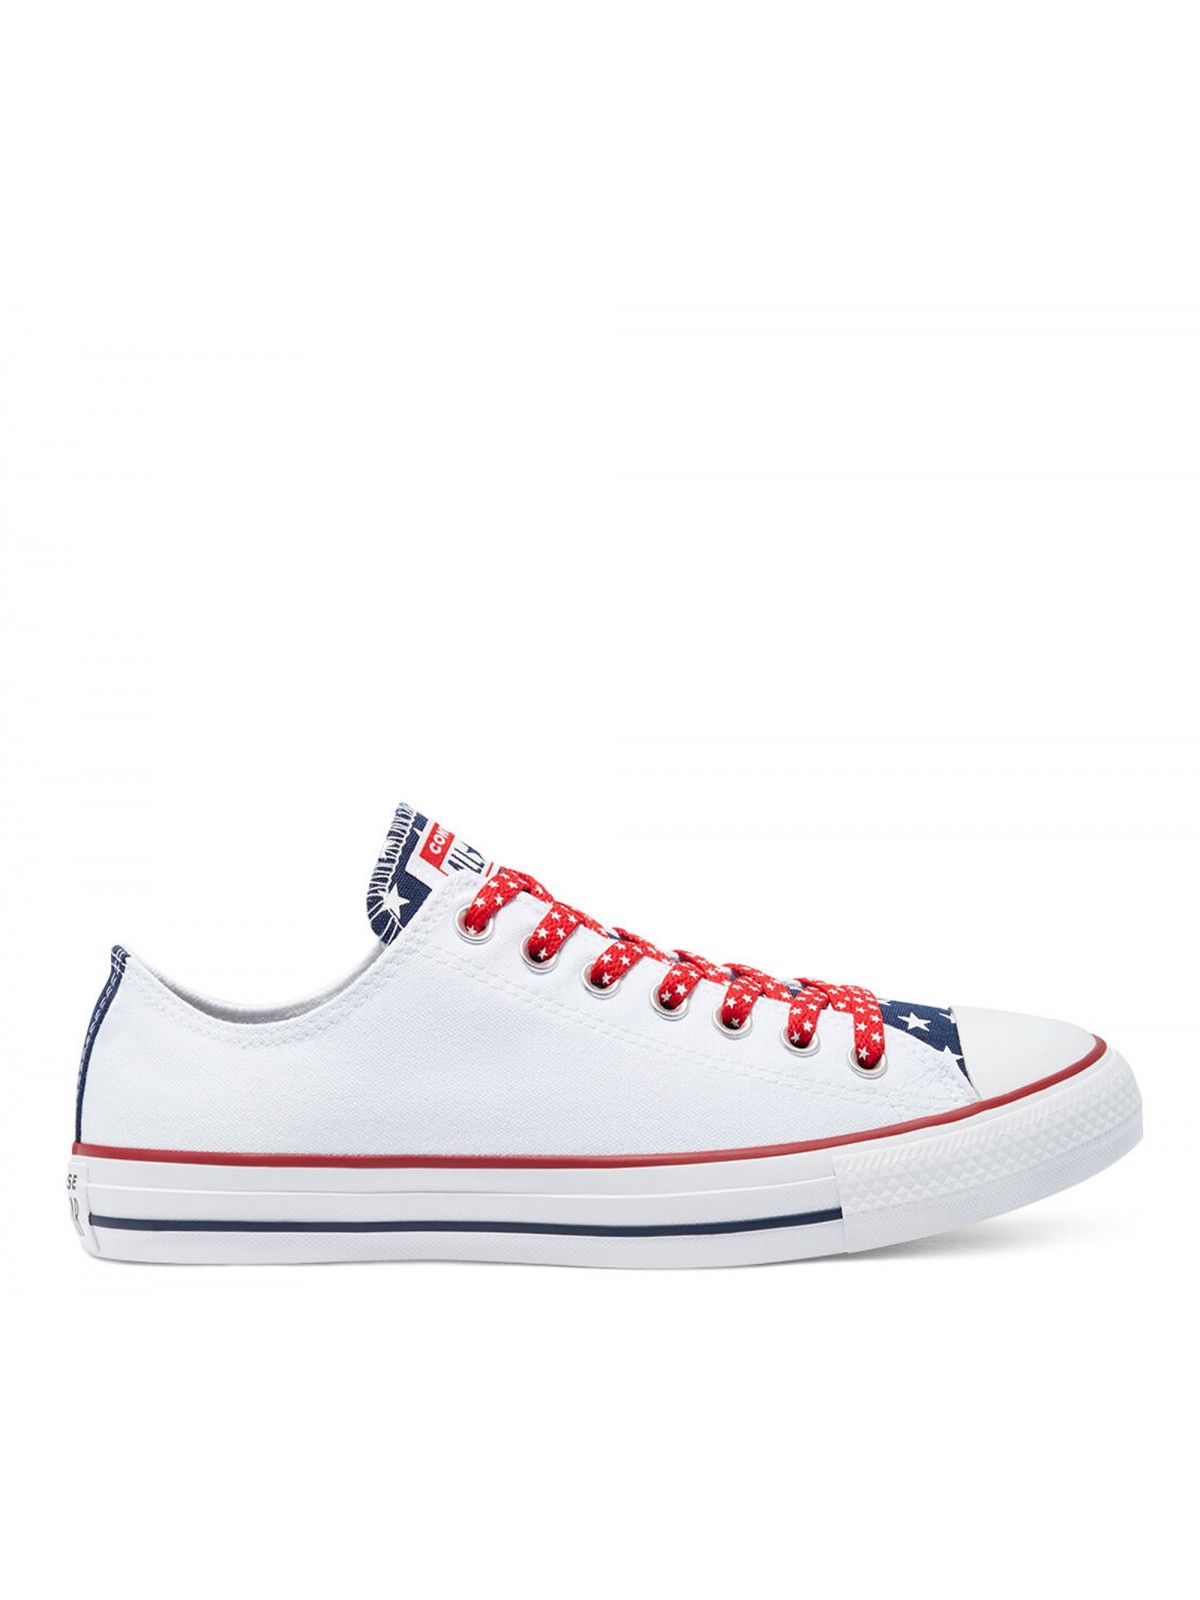 Converse Chuck Taylor all star toile basse us